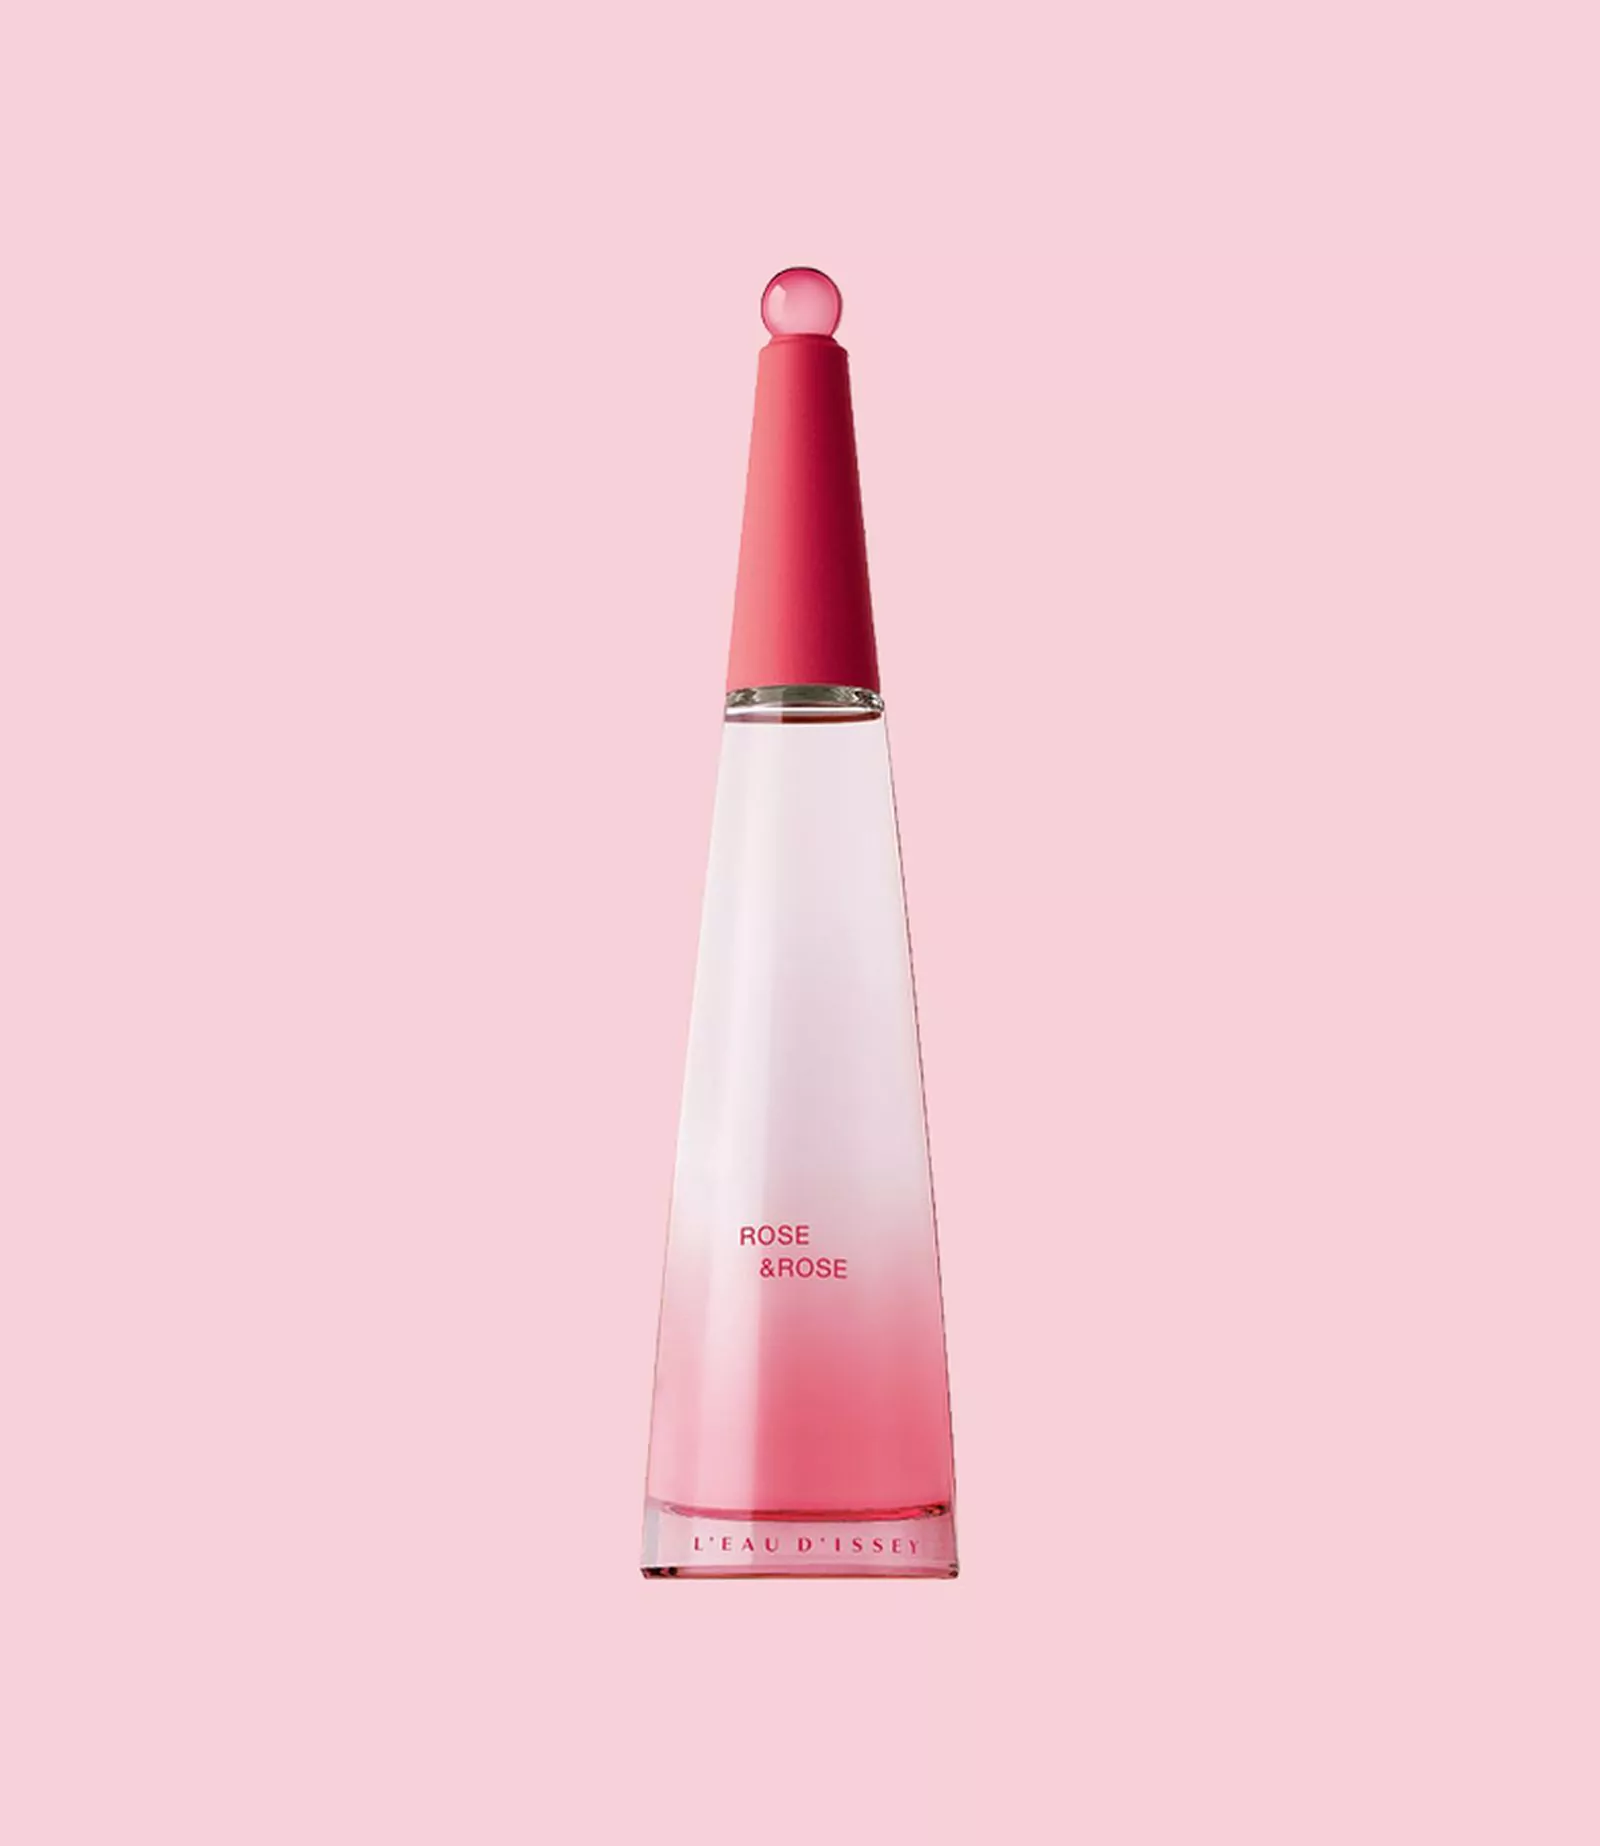 Issey Miyake, L'Eau d'Issey Rose & Rose